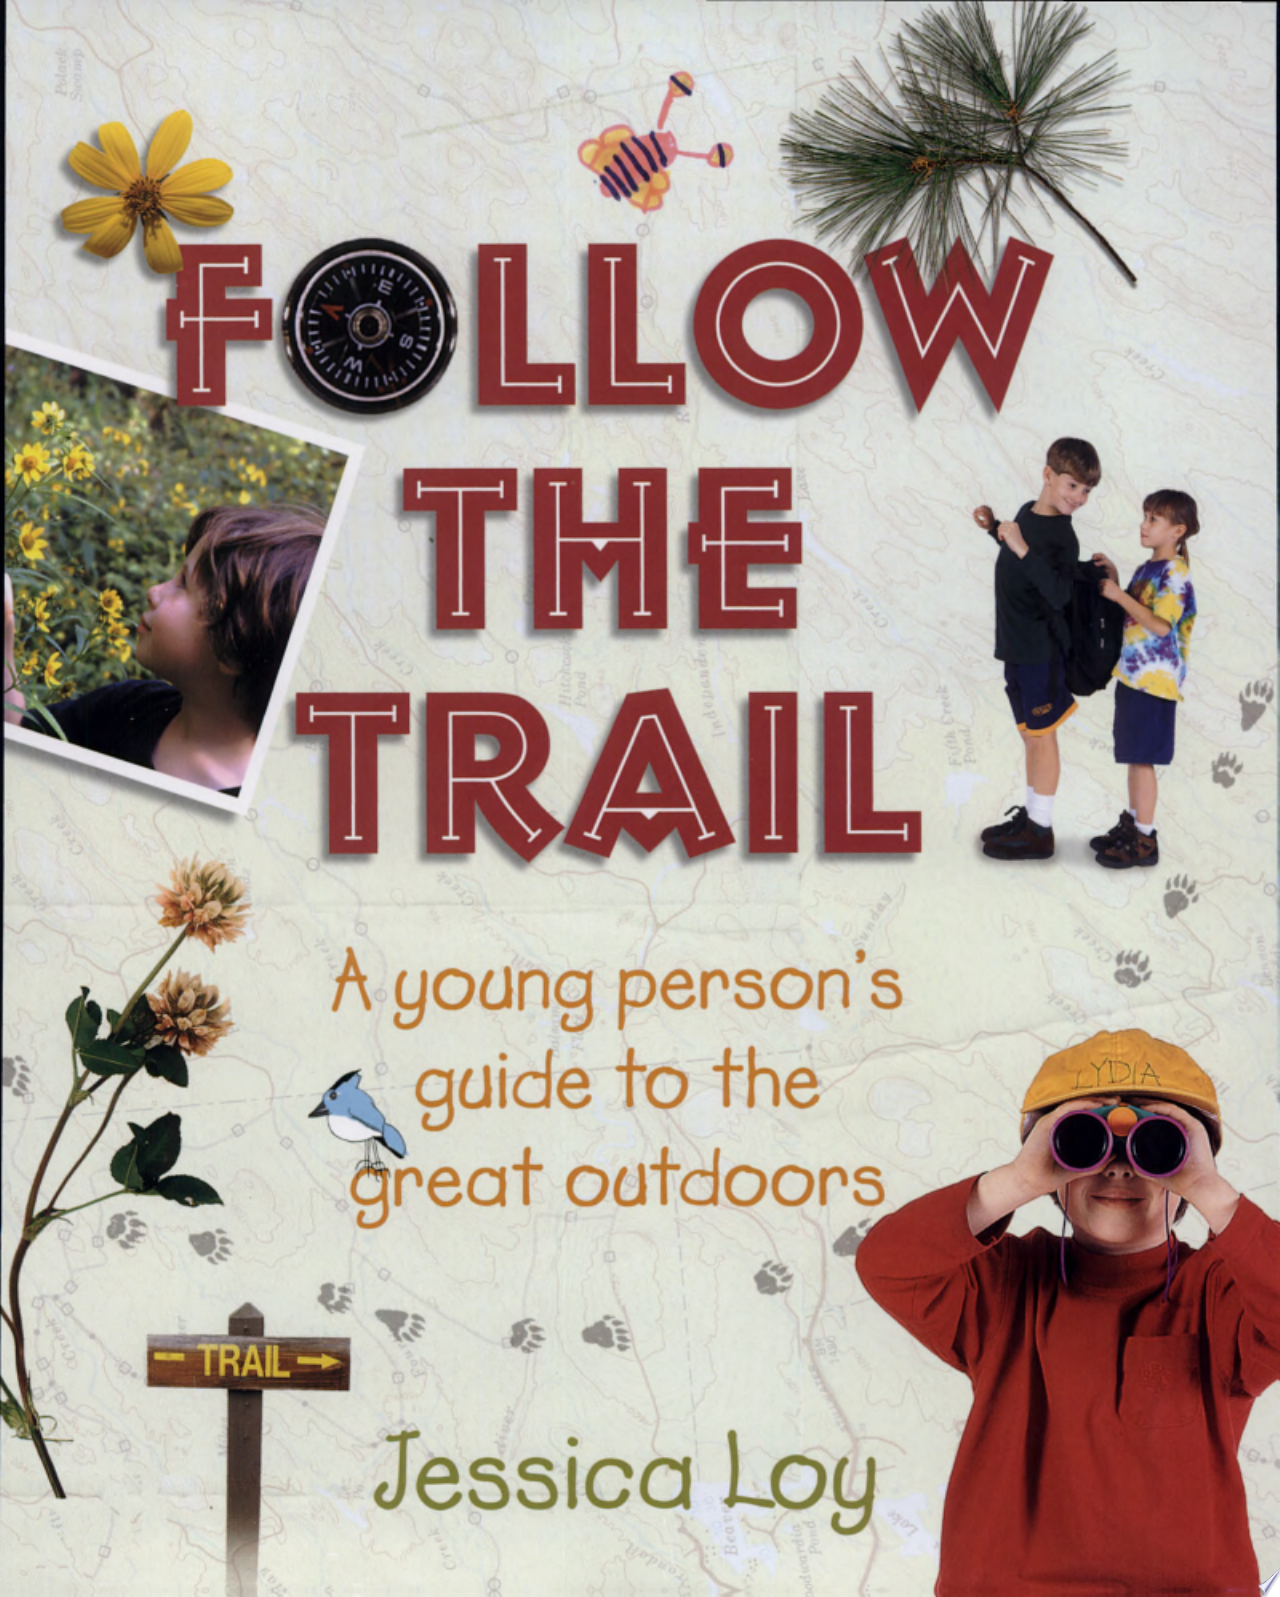 Image for "Follow the Trail: a young person's guide to the great outdoors"